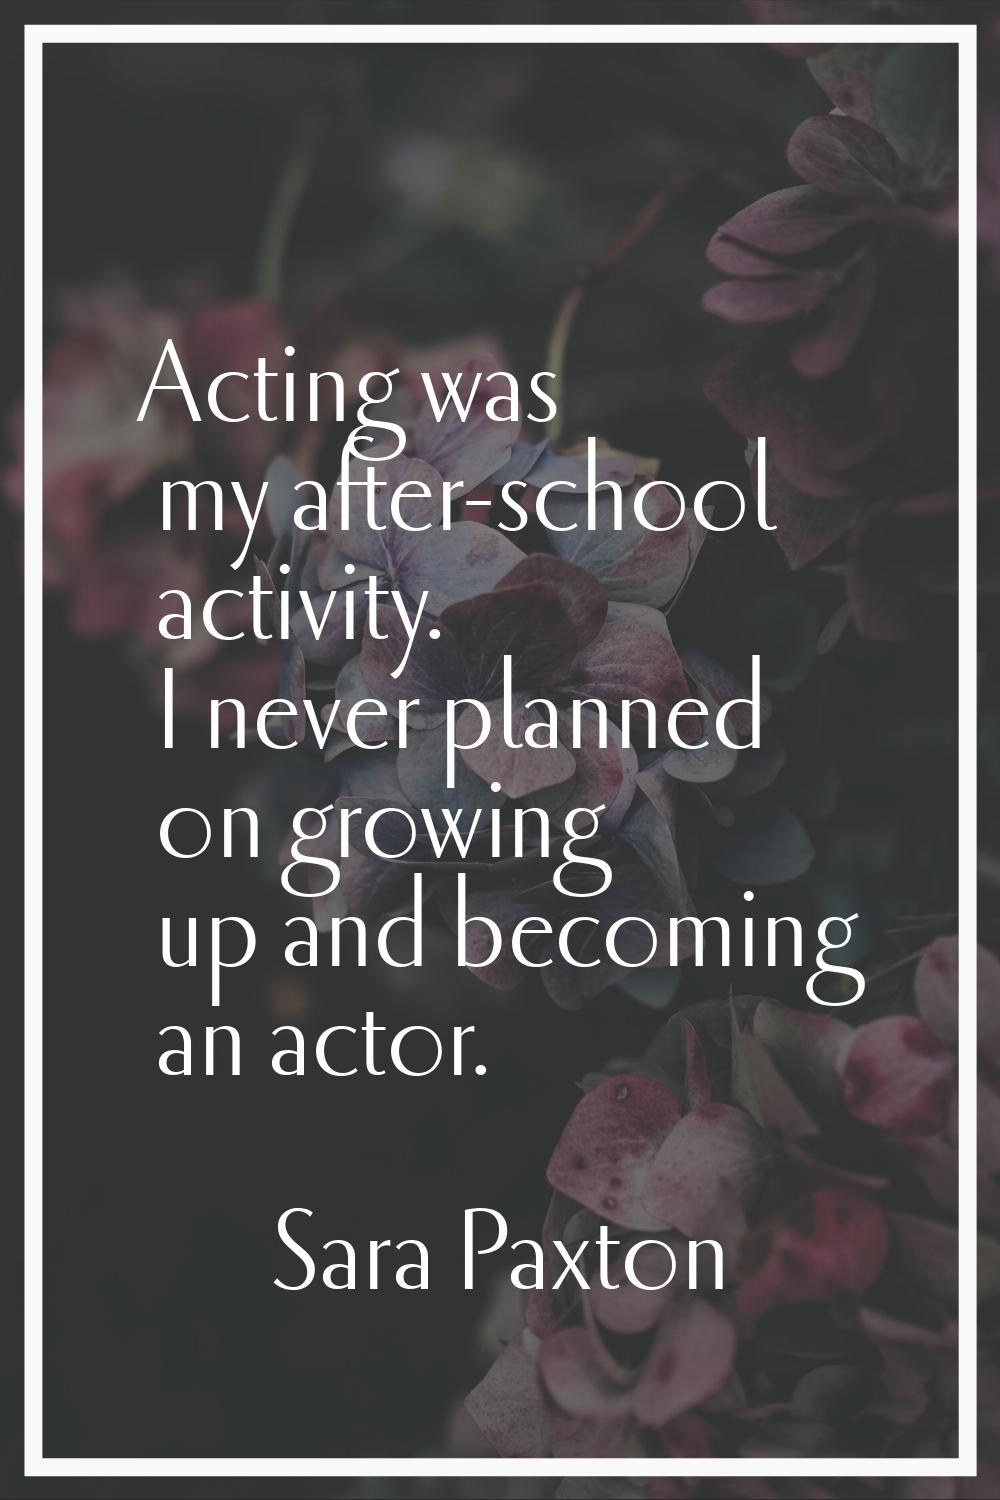 Acting was my after-school activity. I never planned on growing up and becoming an actor.